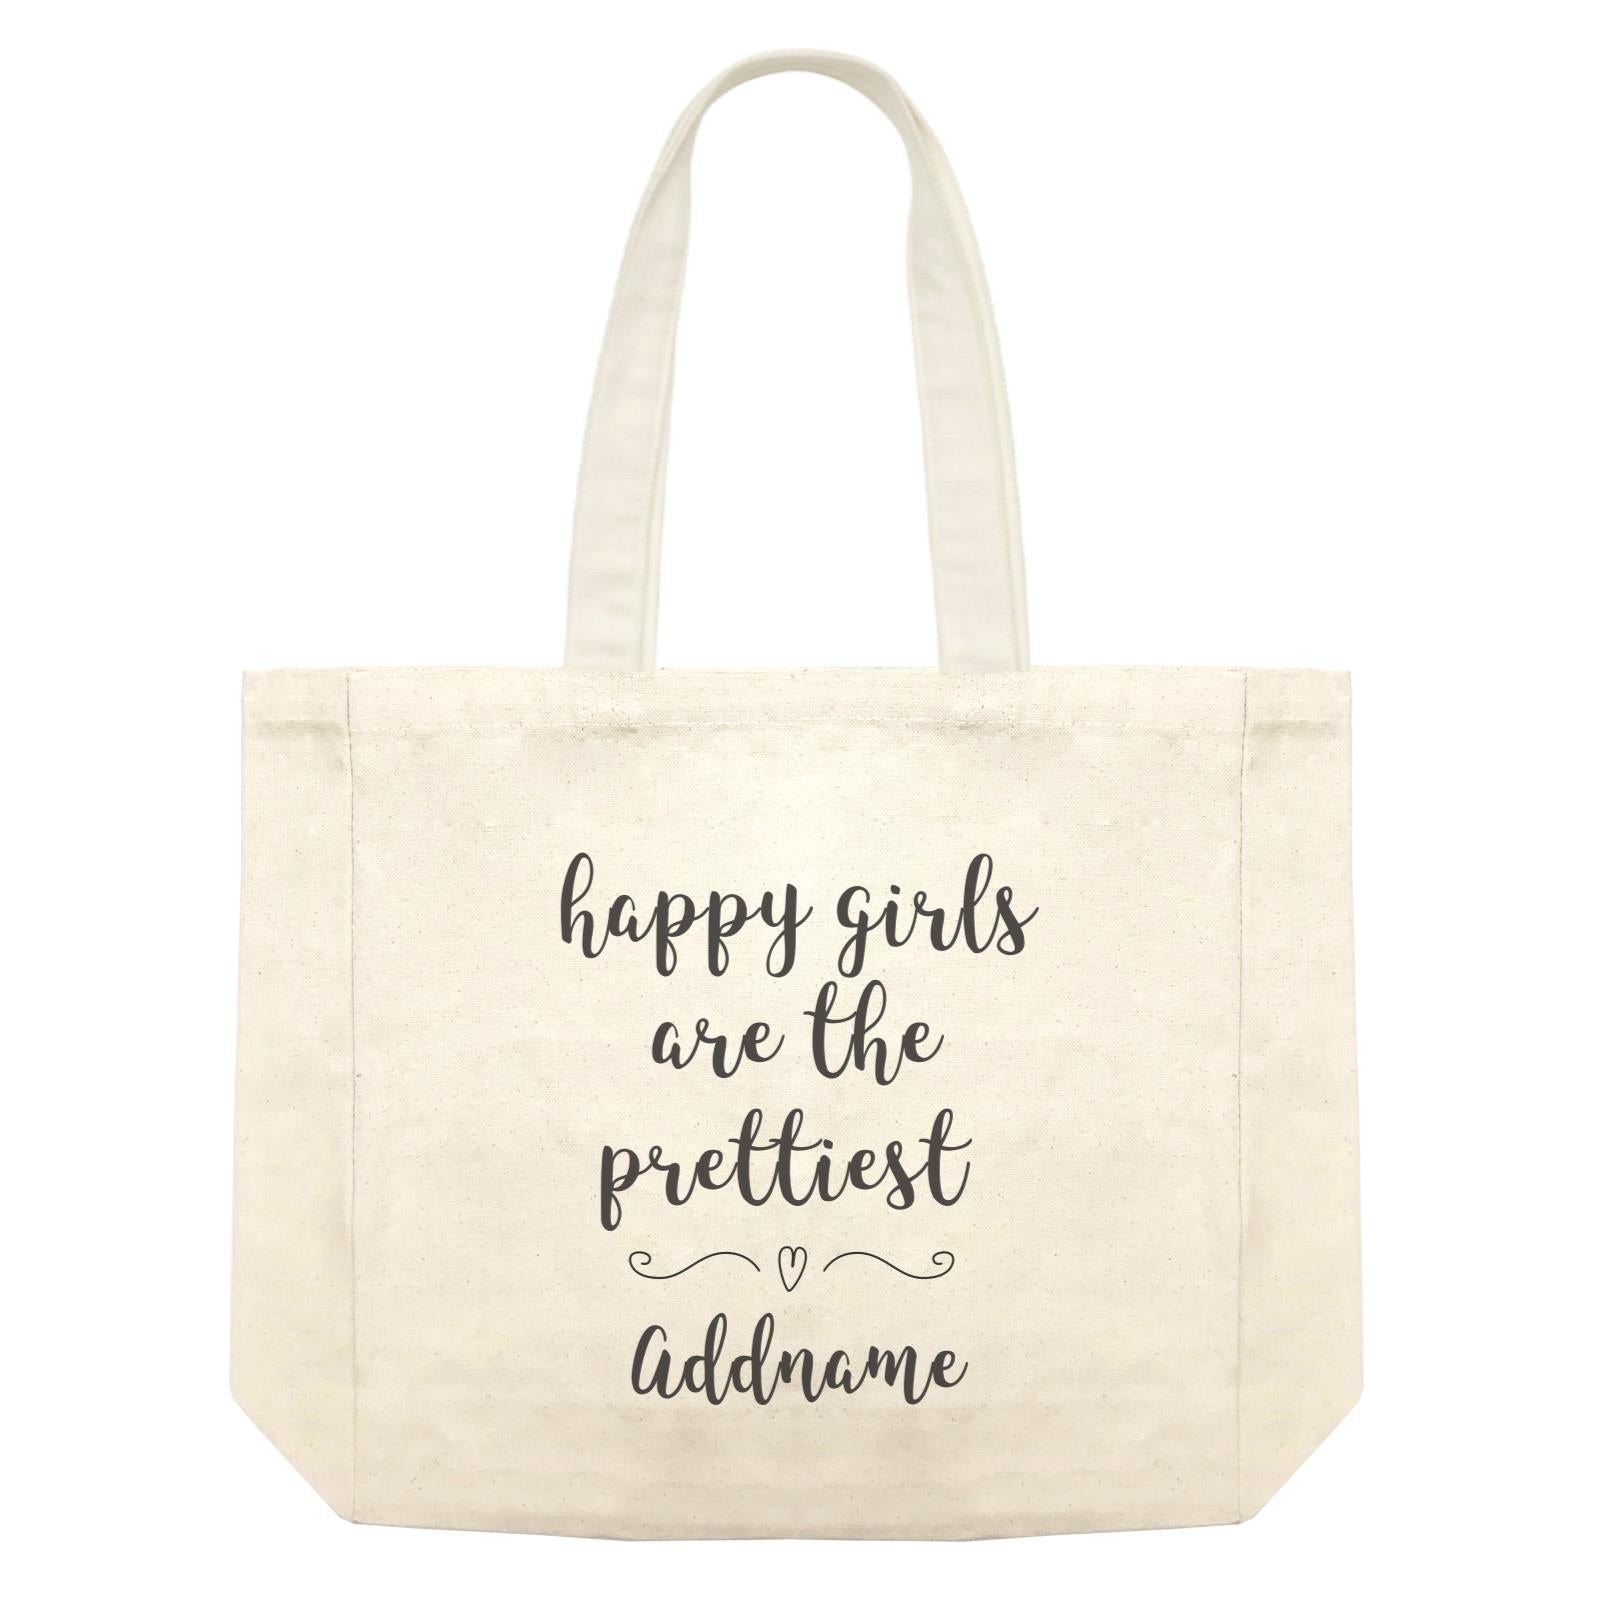 Make Up Quotes Happy Girls Are The Prettiest Addname Shopping Bag